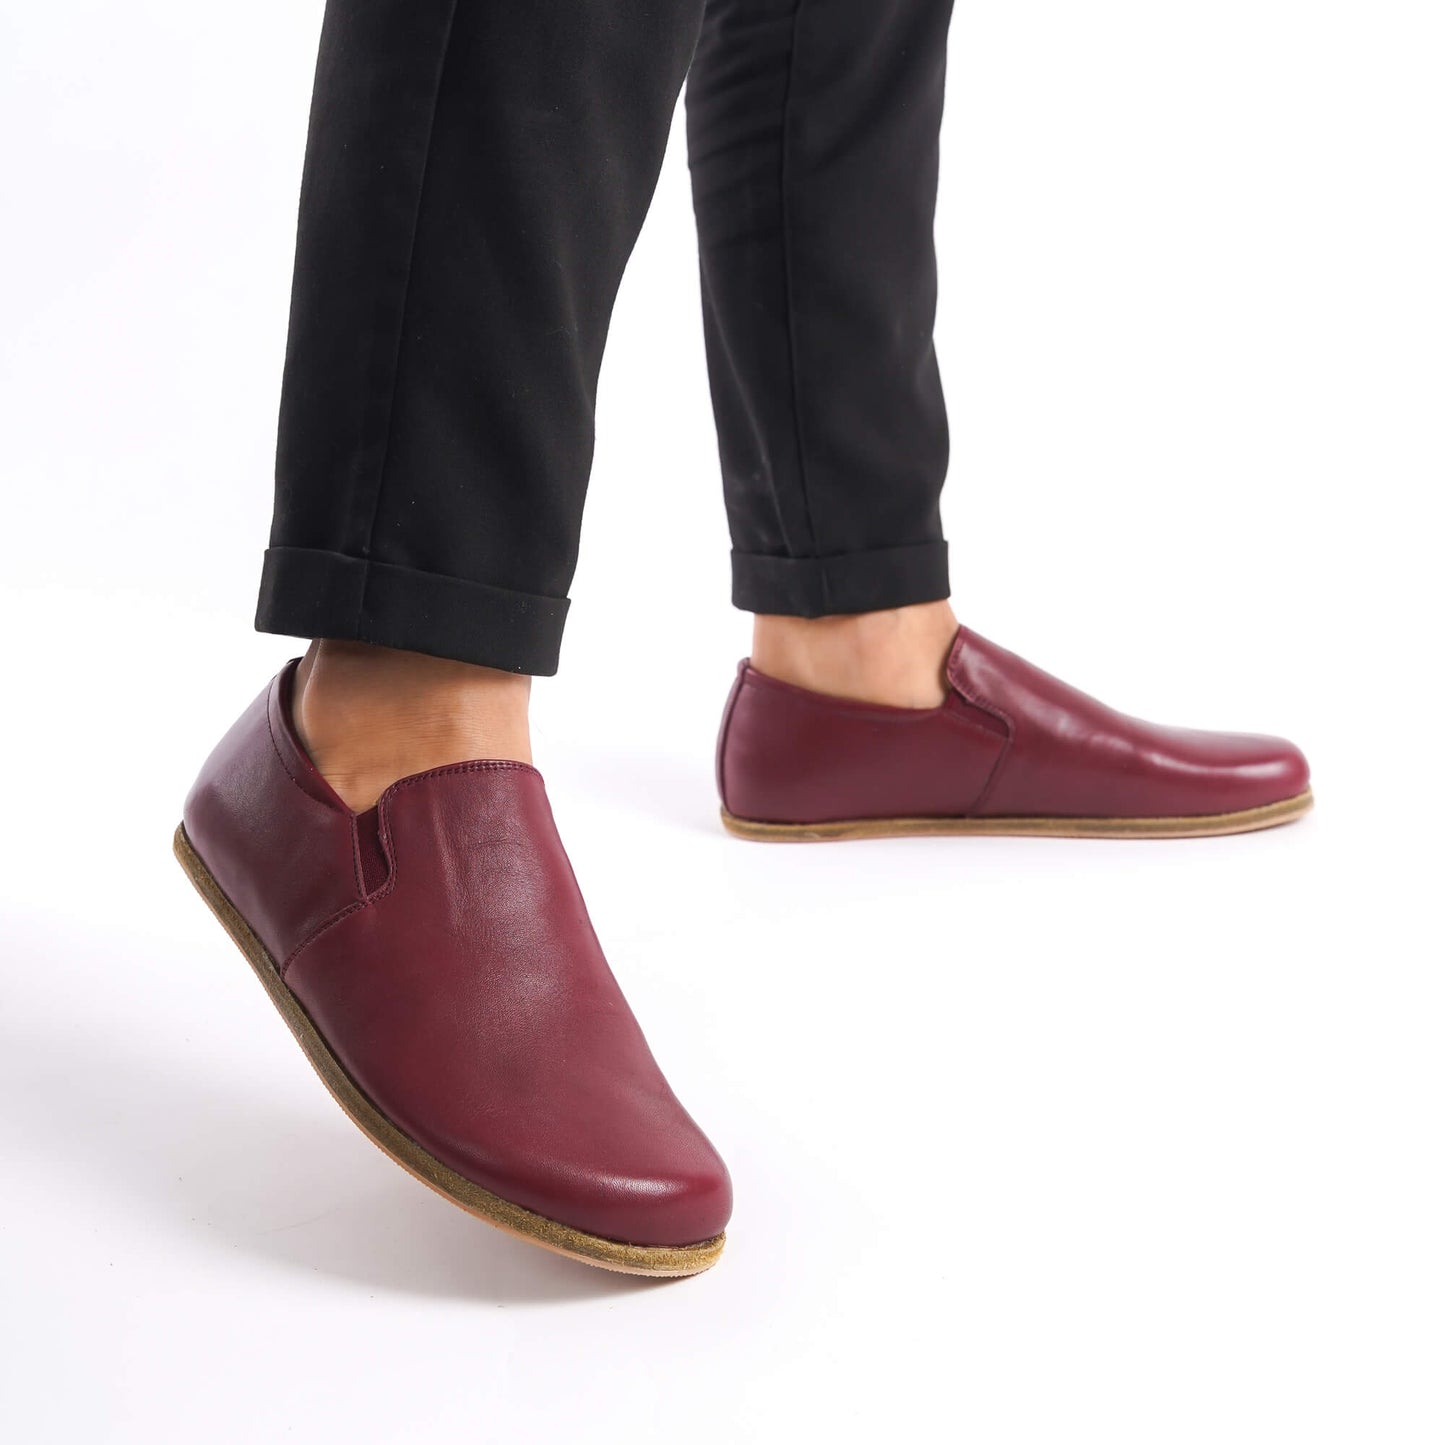 Side view of Ionia Leather Barefoot Men's Loafers in burgundy worn with black pants, emphasizing their sleek and stylish look.